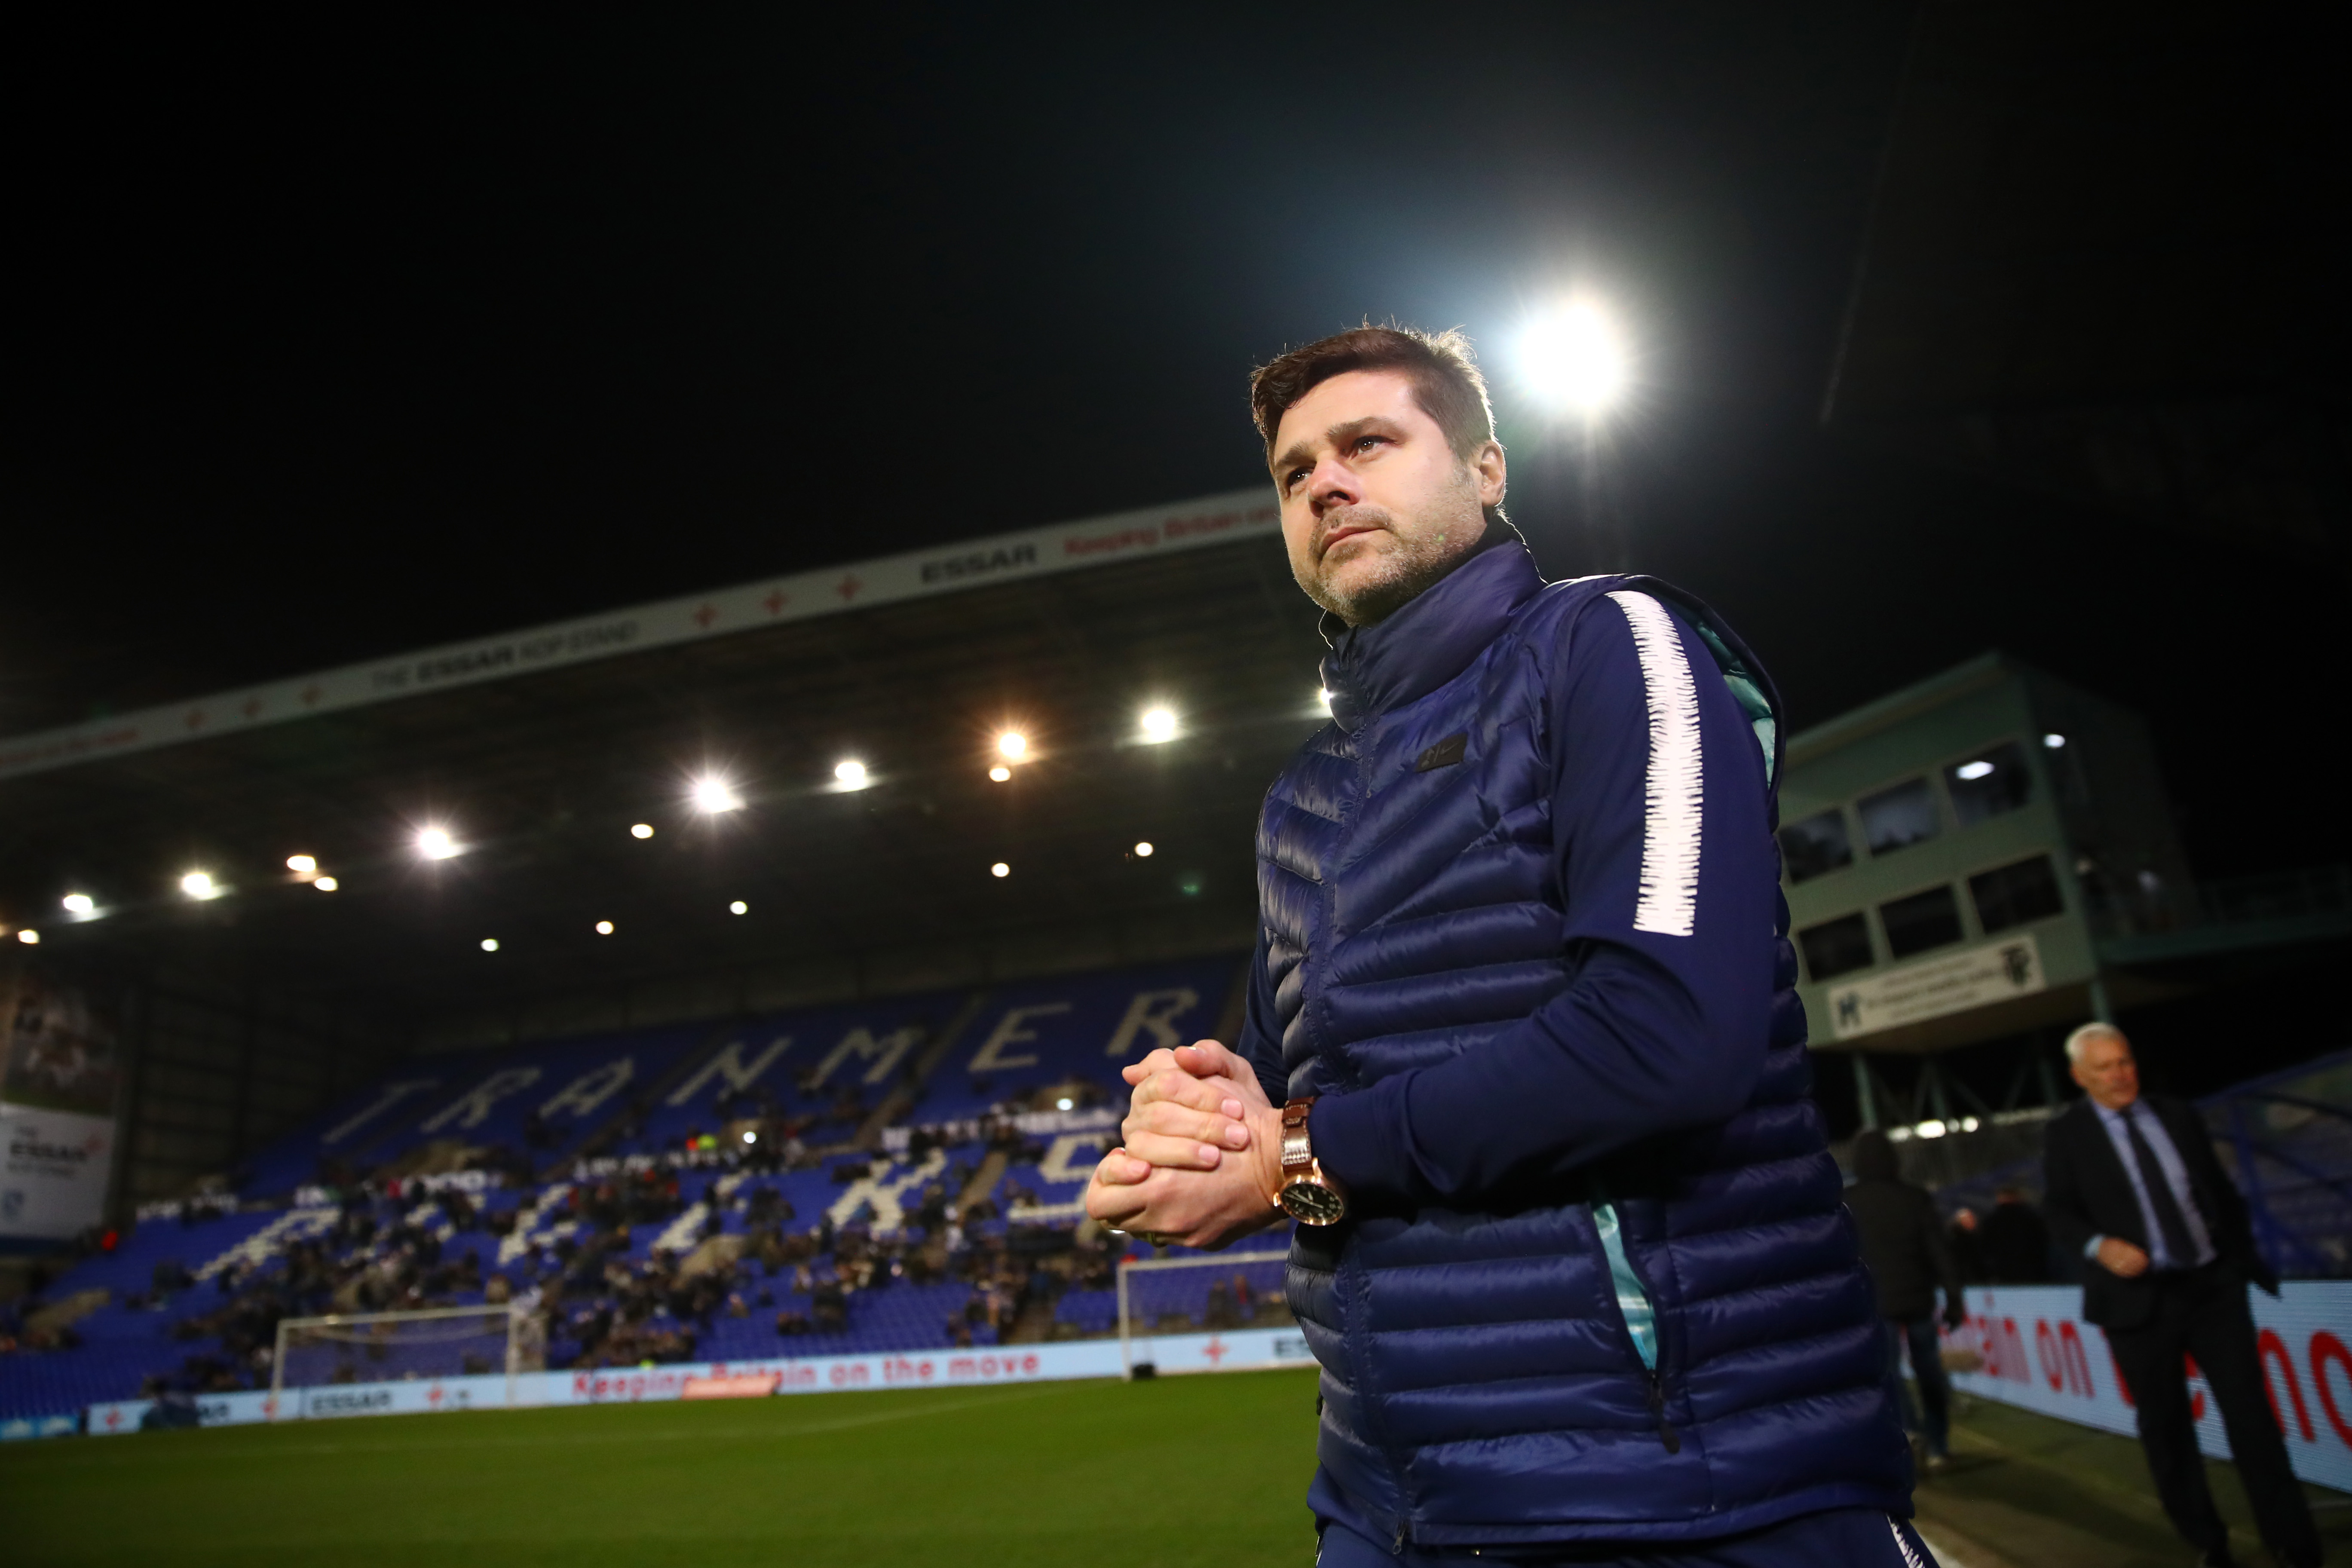 Poaching Pochettino from Tottenham could be a tall order for Manchester United. (Photo by Clive Brunskill/Getty Images)